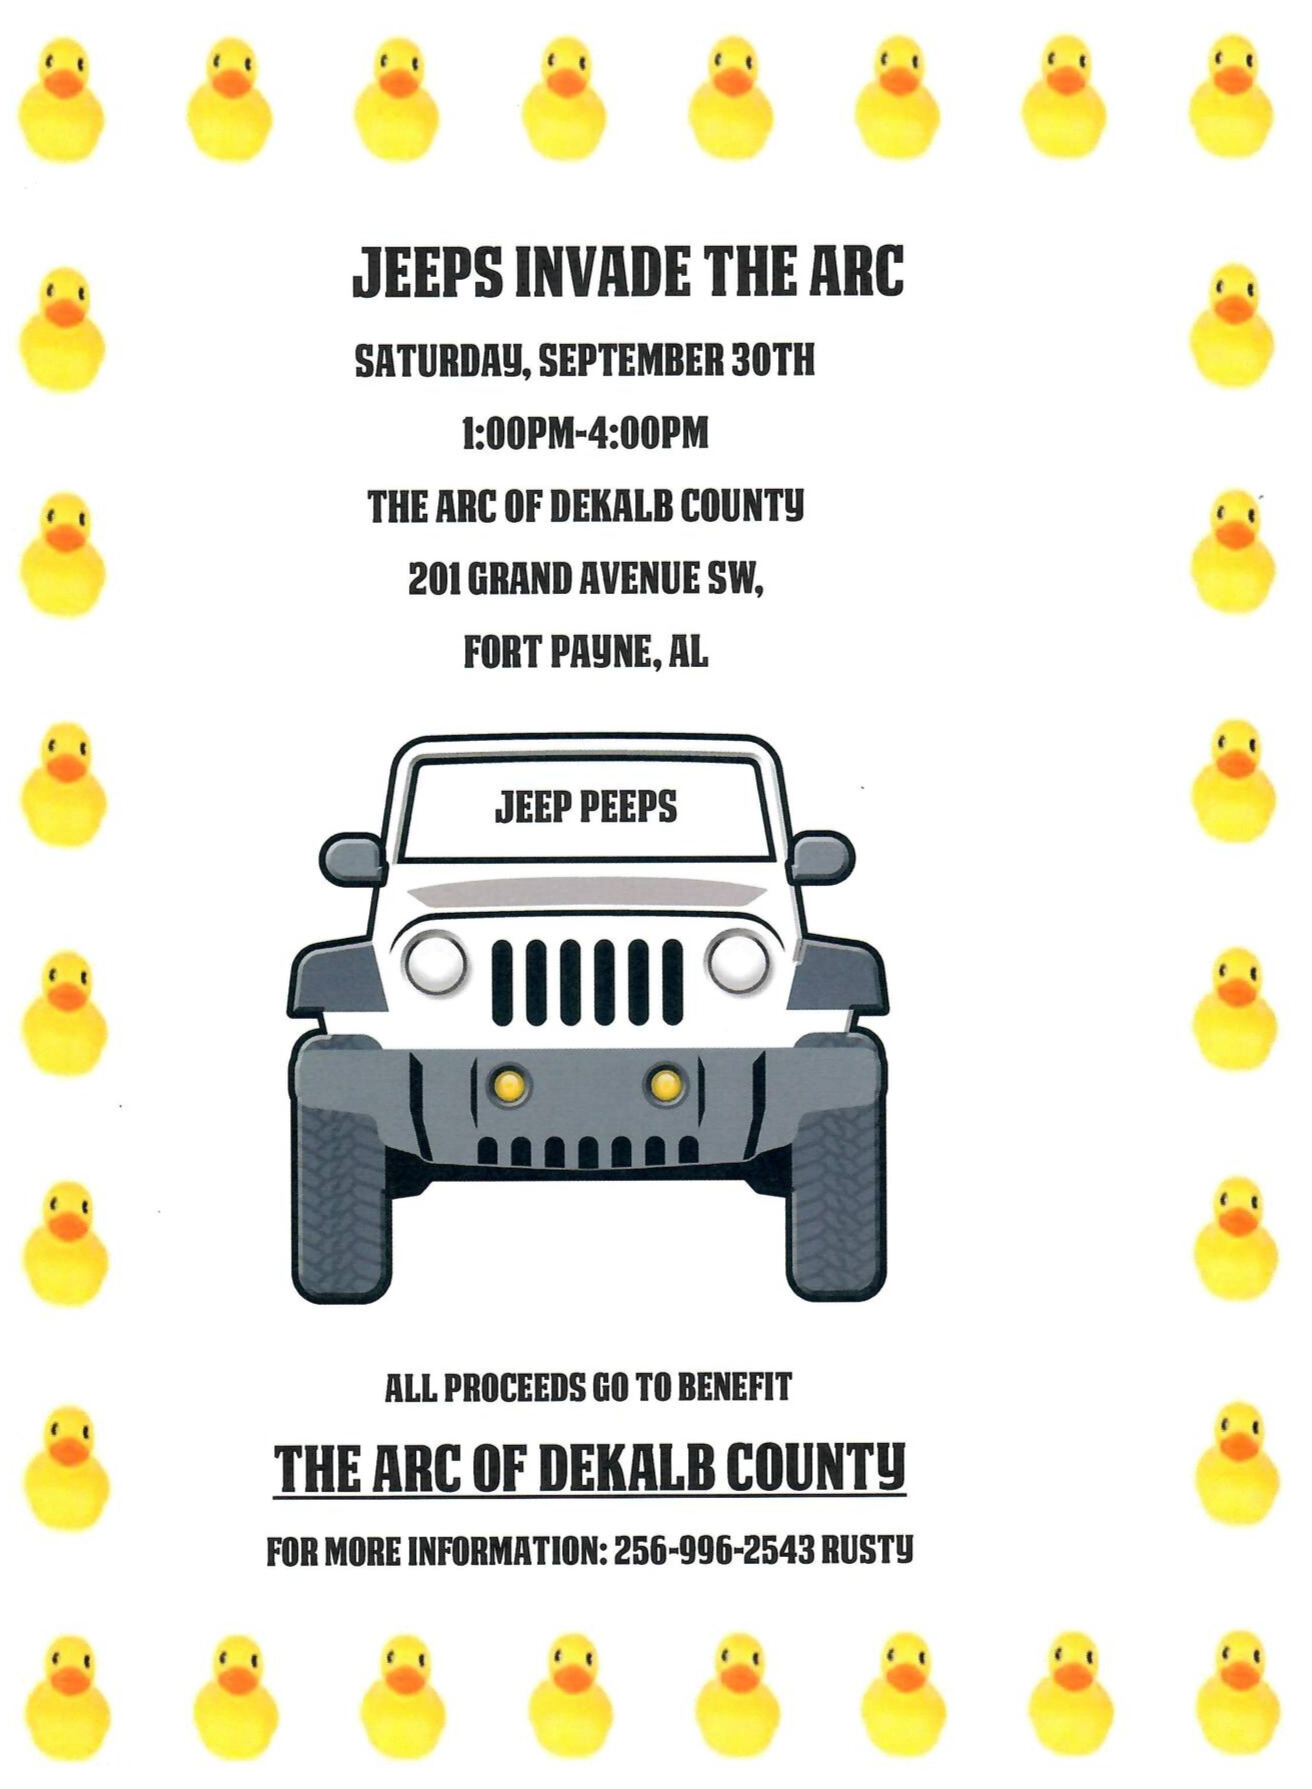 Jeeps Invade the ARC